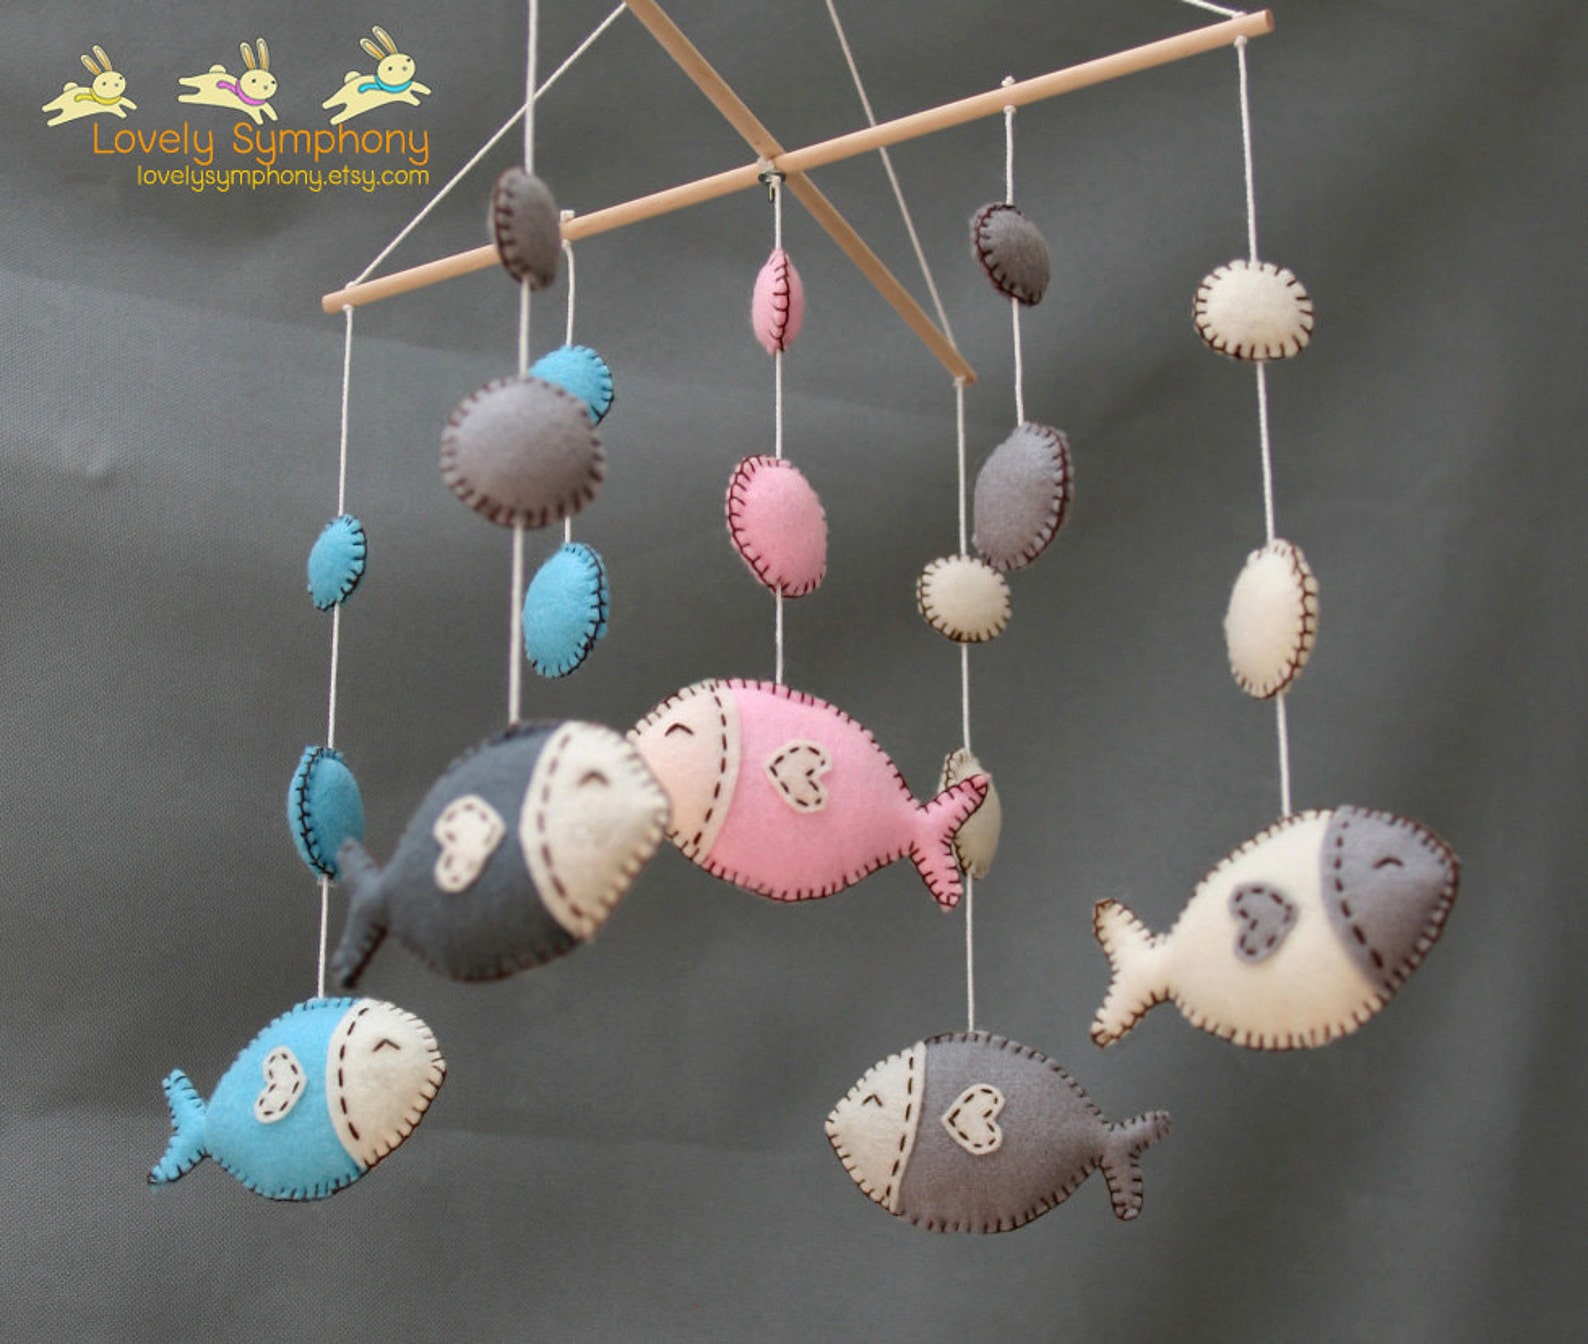 fishes-baby-mobile-lovely-fishes-hanging-mobile-fishes-and-etsy